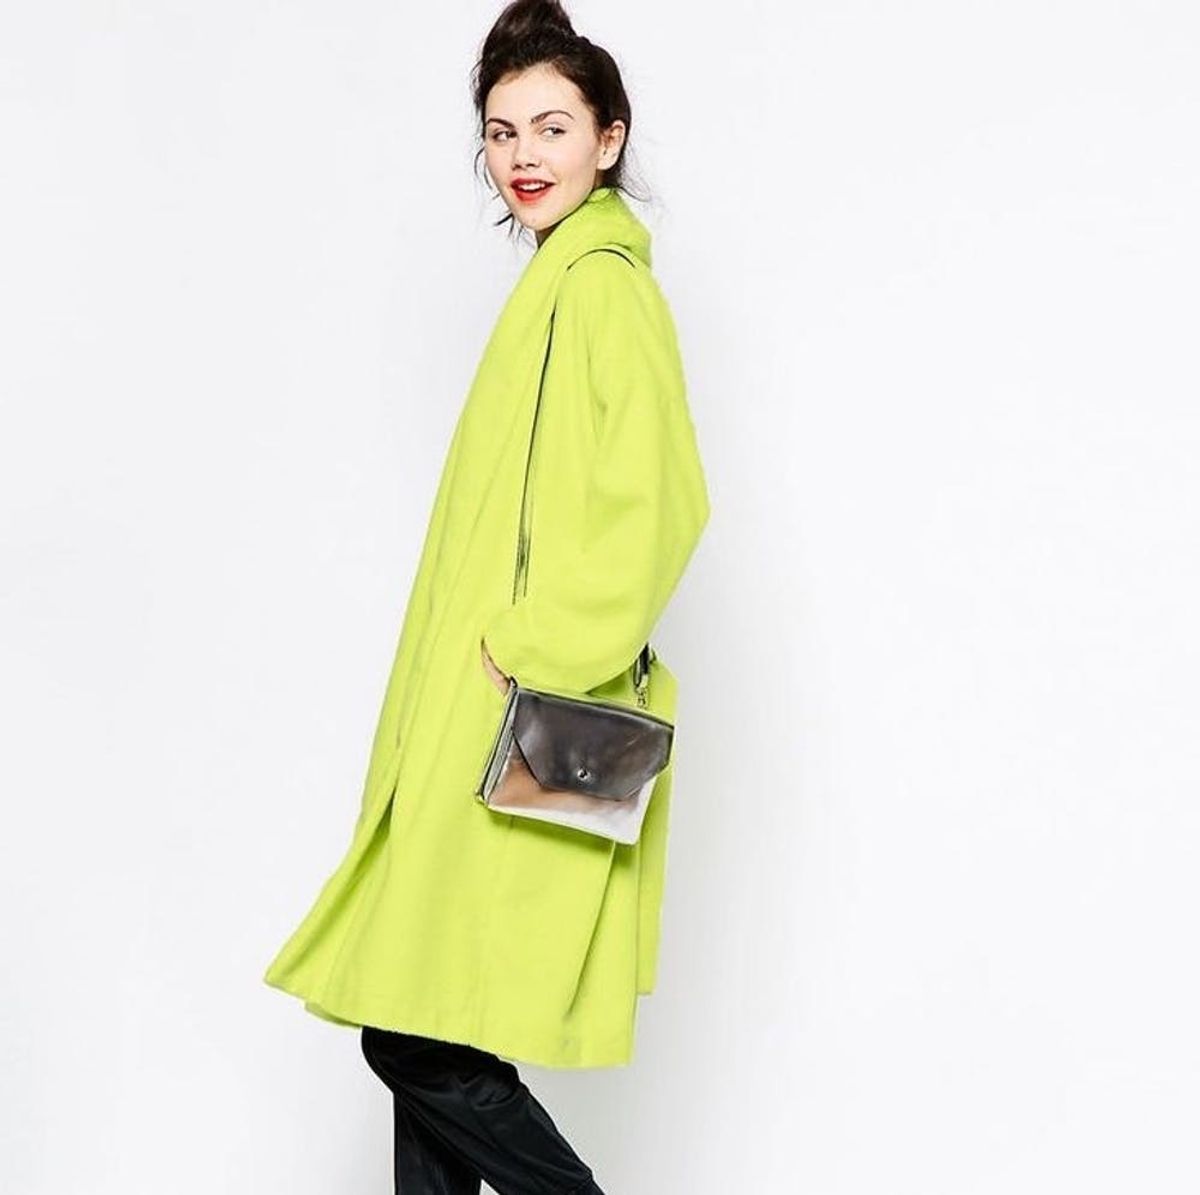 18 Colorful Winter Coats to Keep You Warm in Style